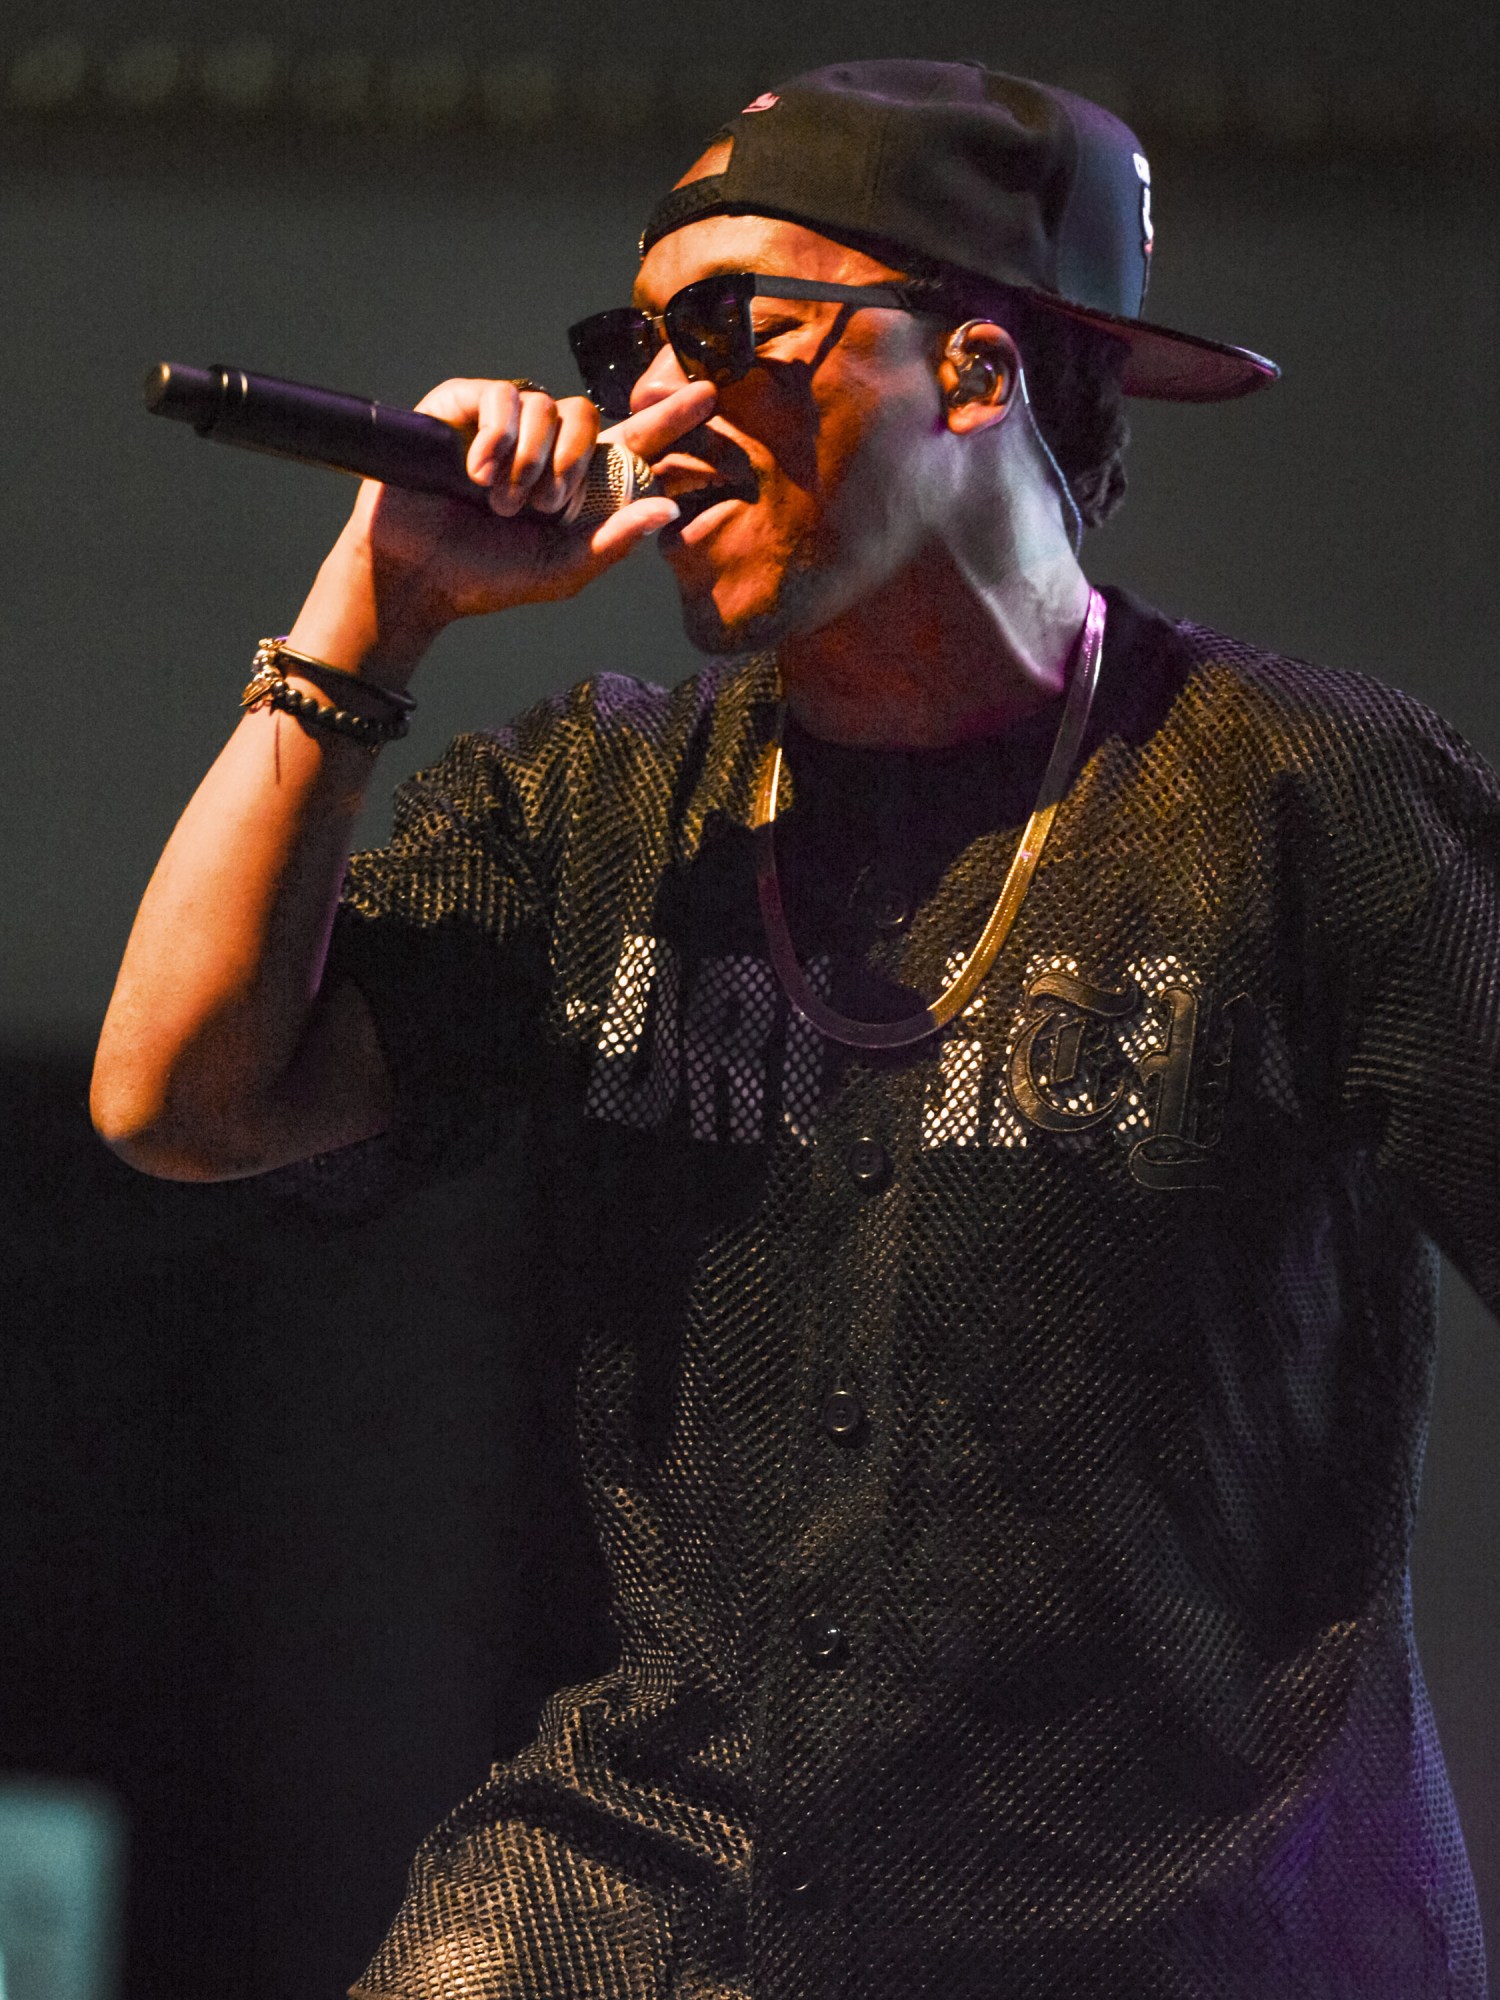 Artist Lupe Fiasco performing during his "Tetsuo and Youth Preview" tour in Nashville